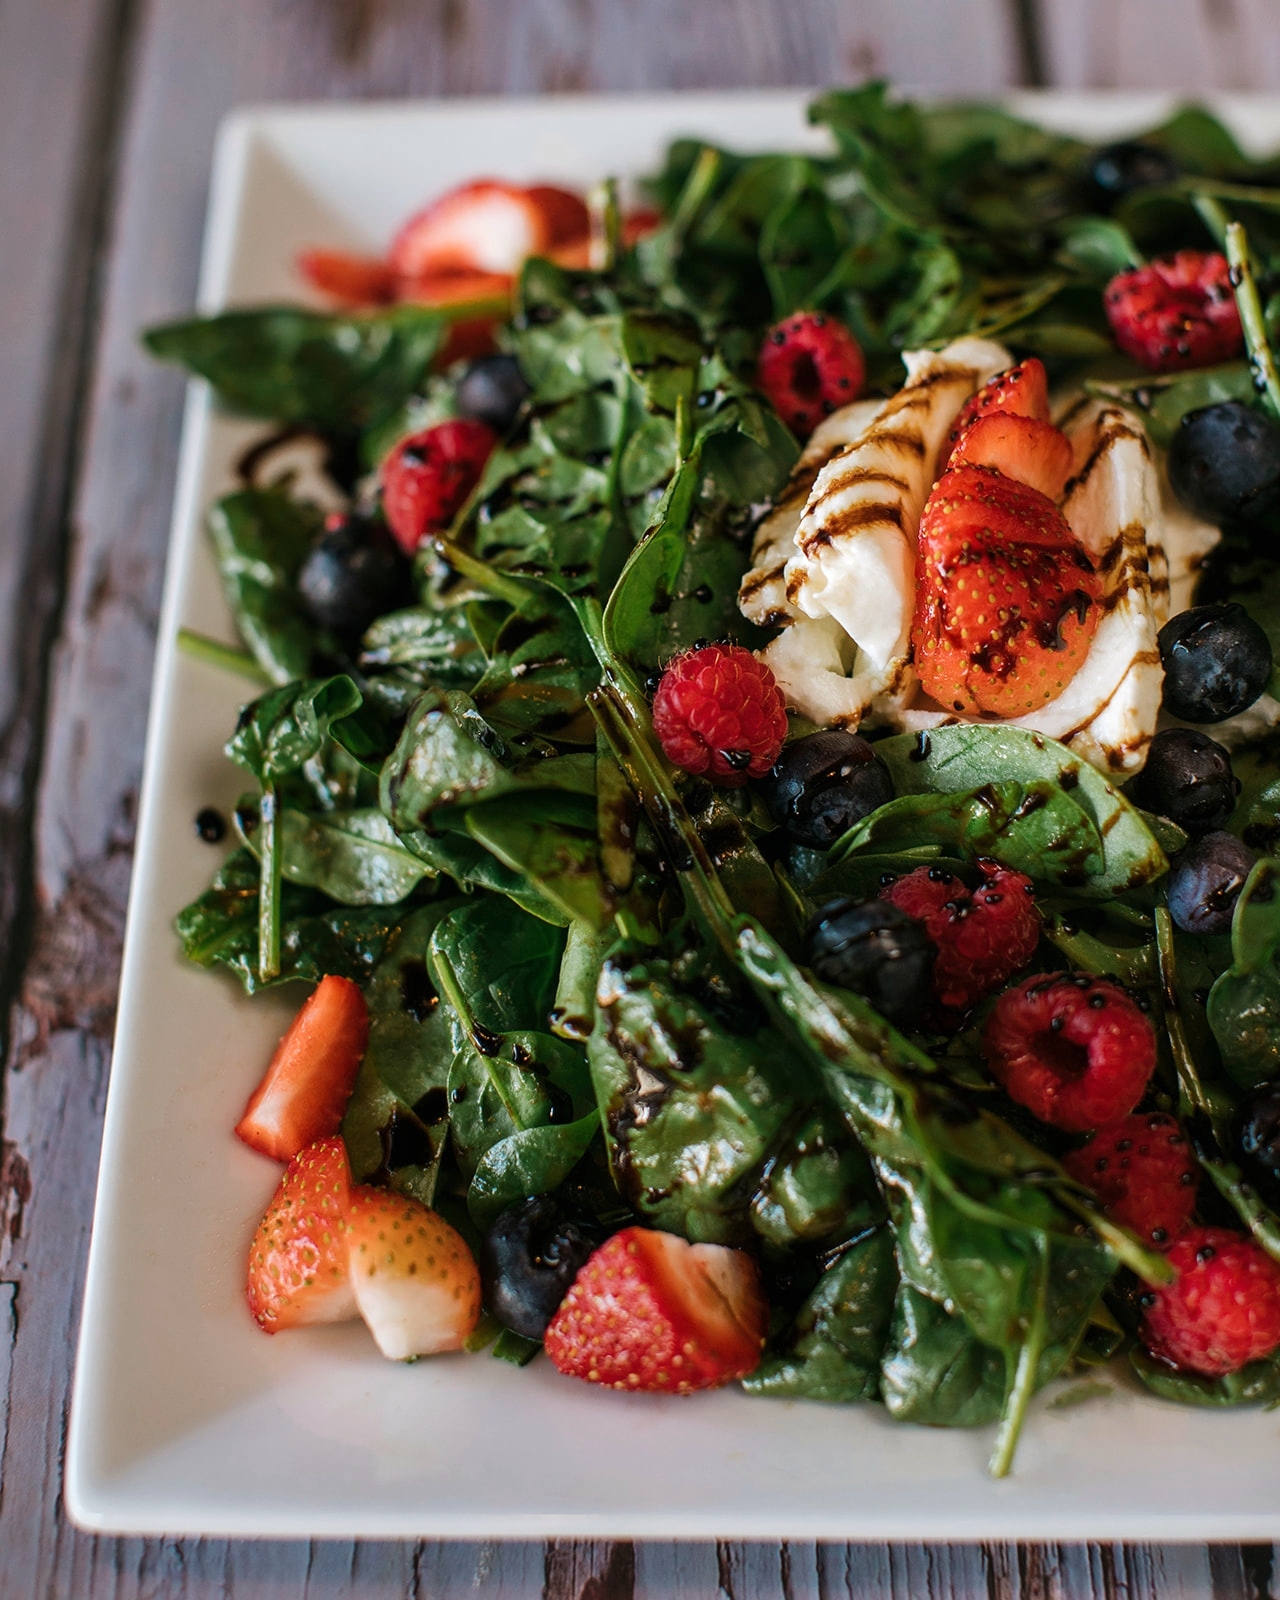 Strawberry salad with mixed greens blueberries and burrata